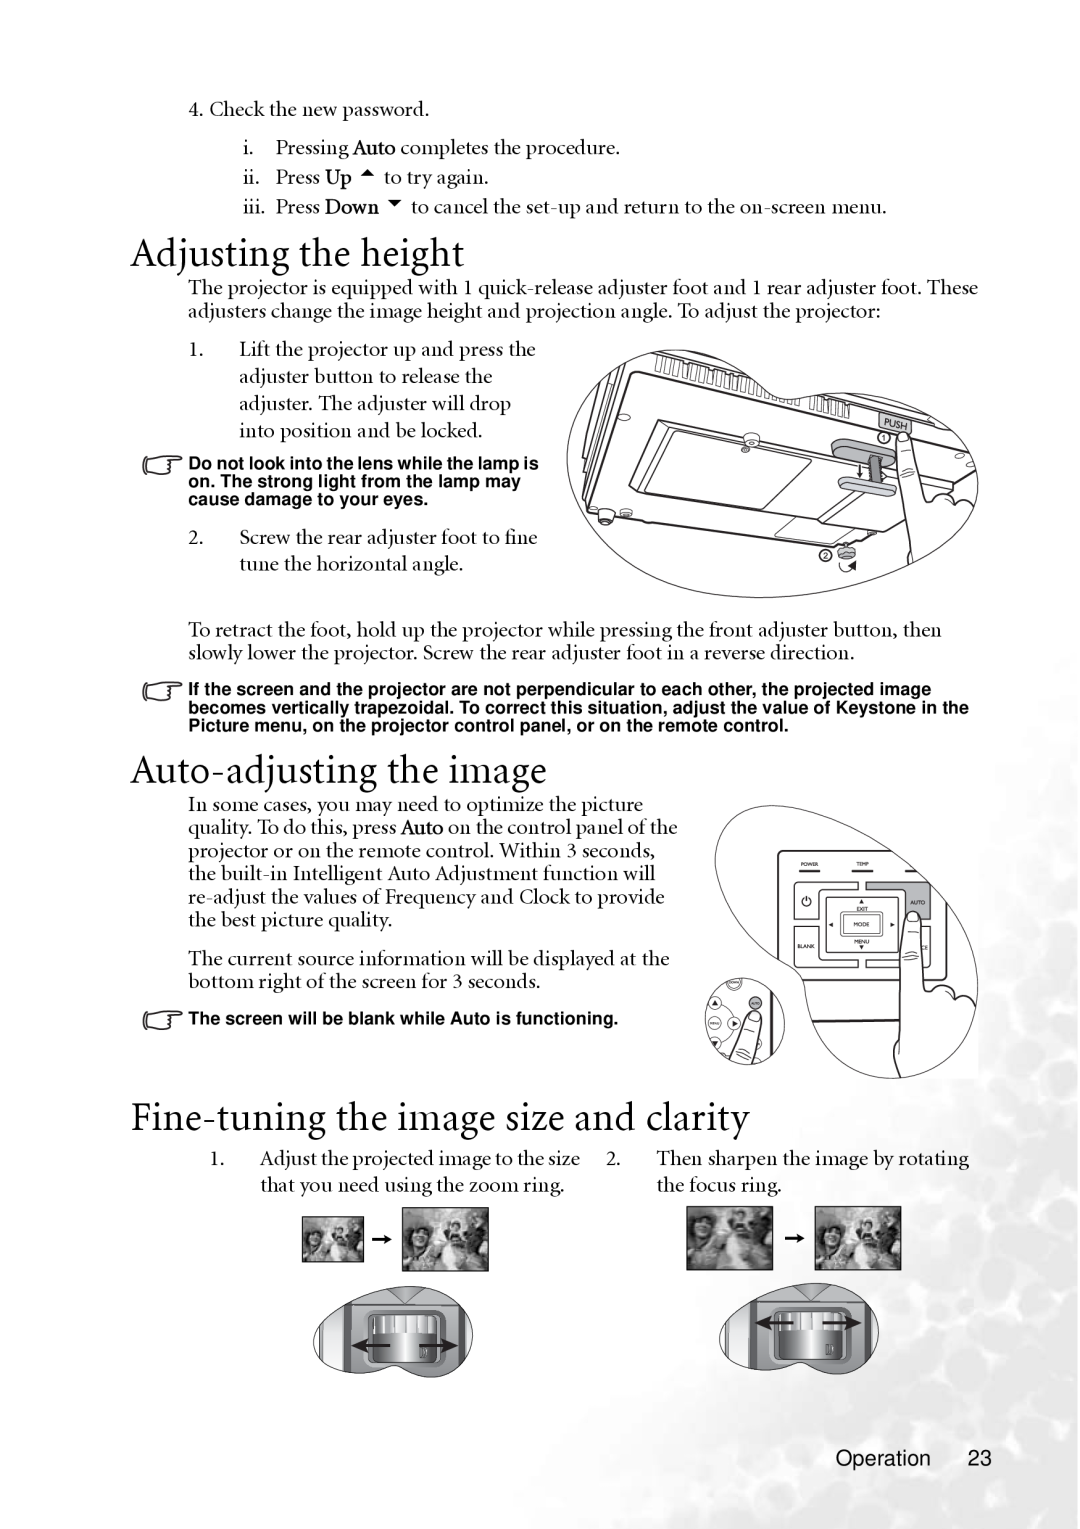 BenQ MP610 user manual Adjusting the height, Auto-adjusting the image, Fine-tuning the image size and clarity 